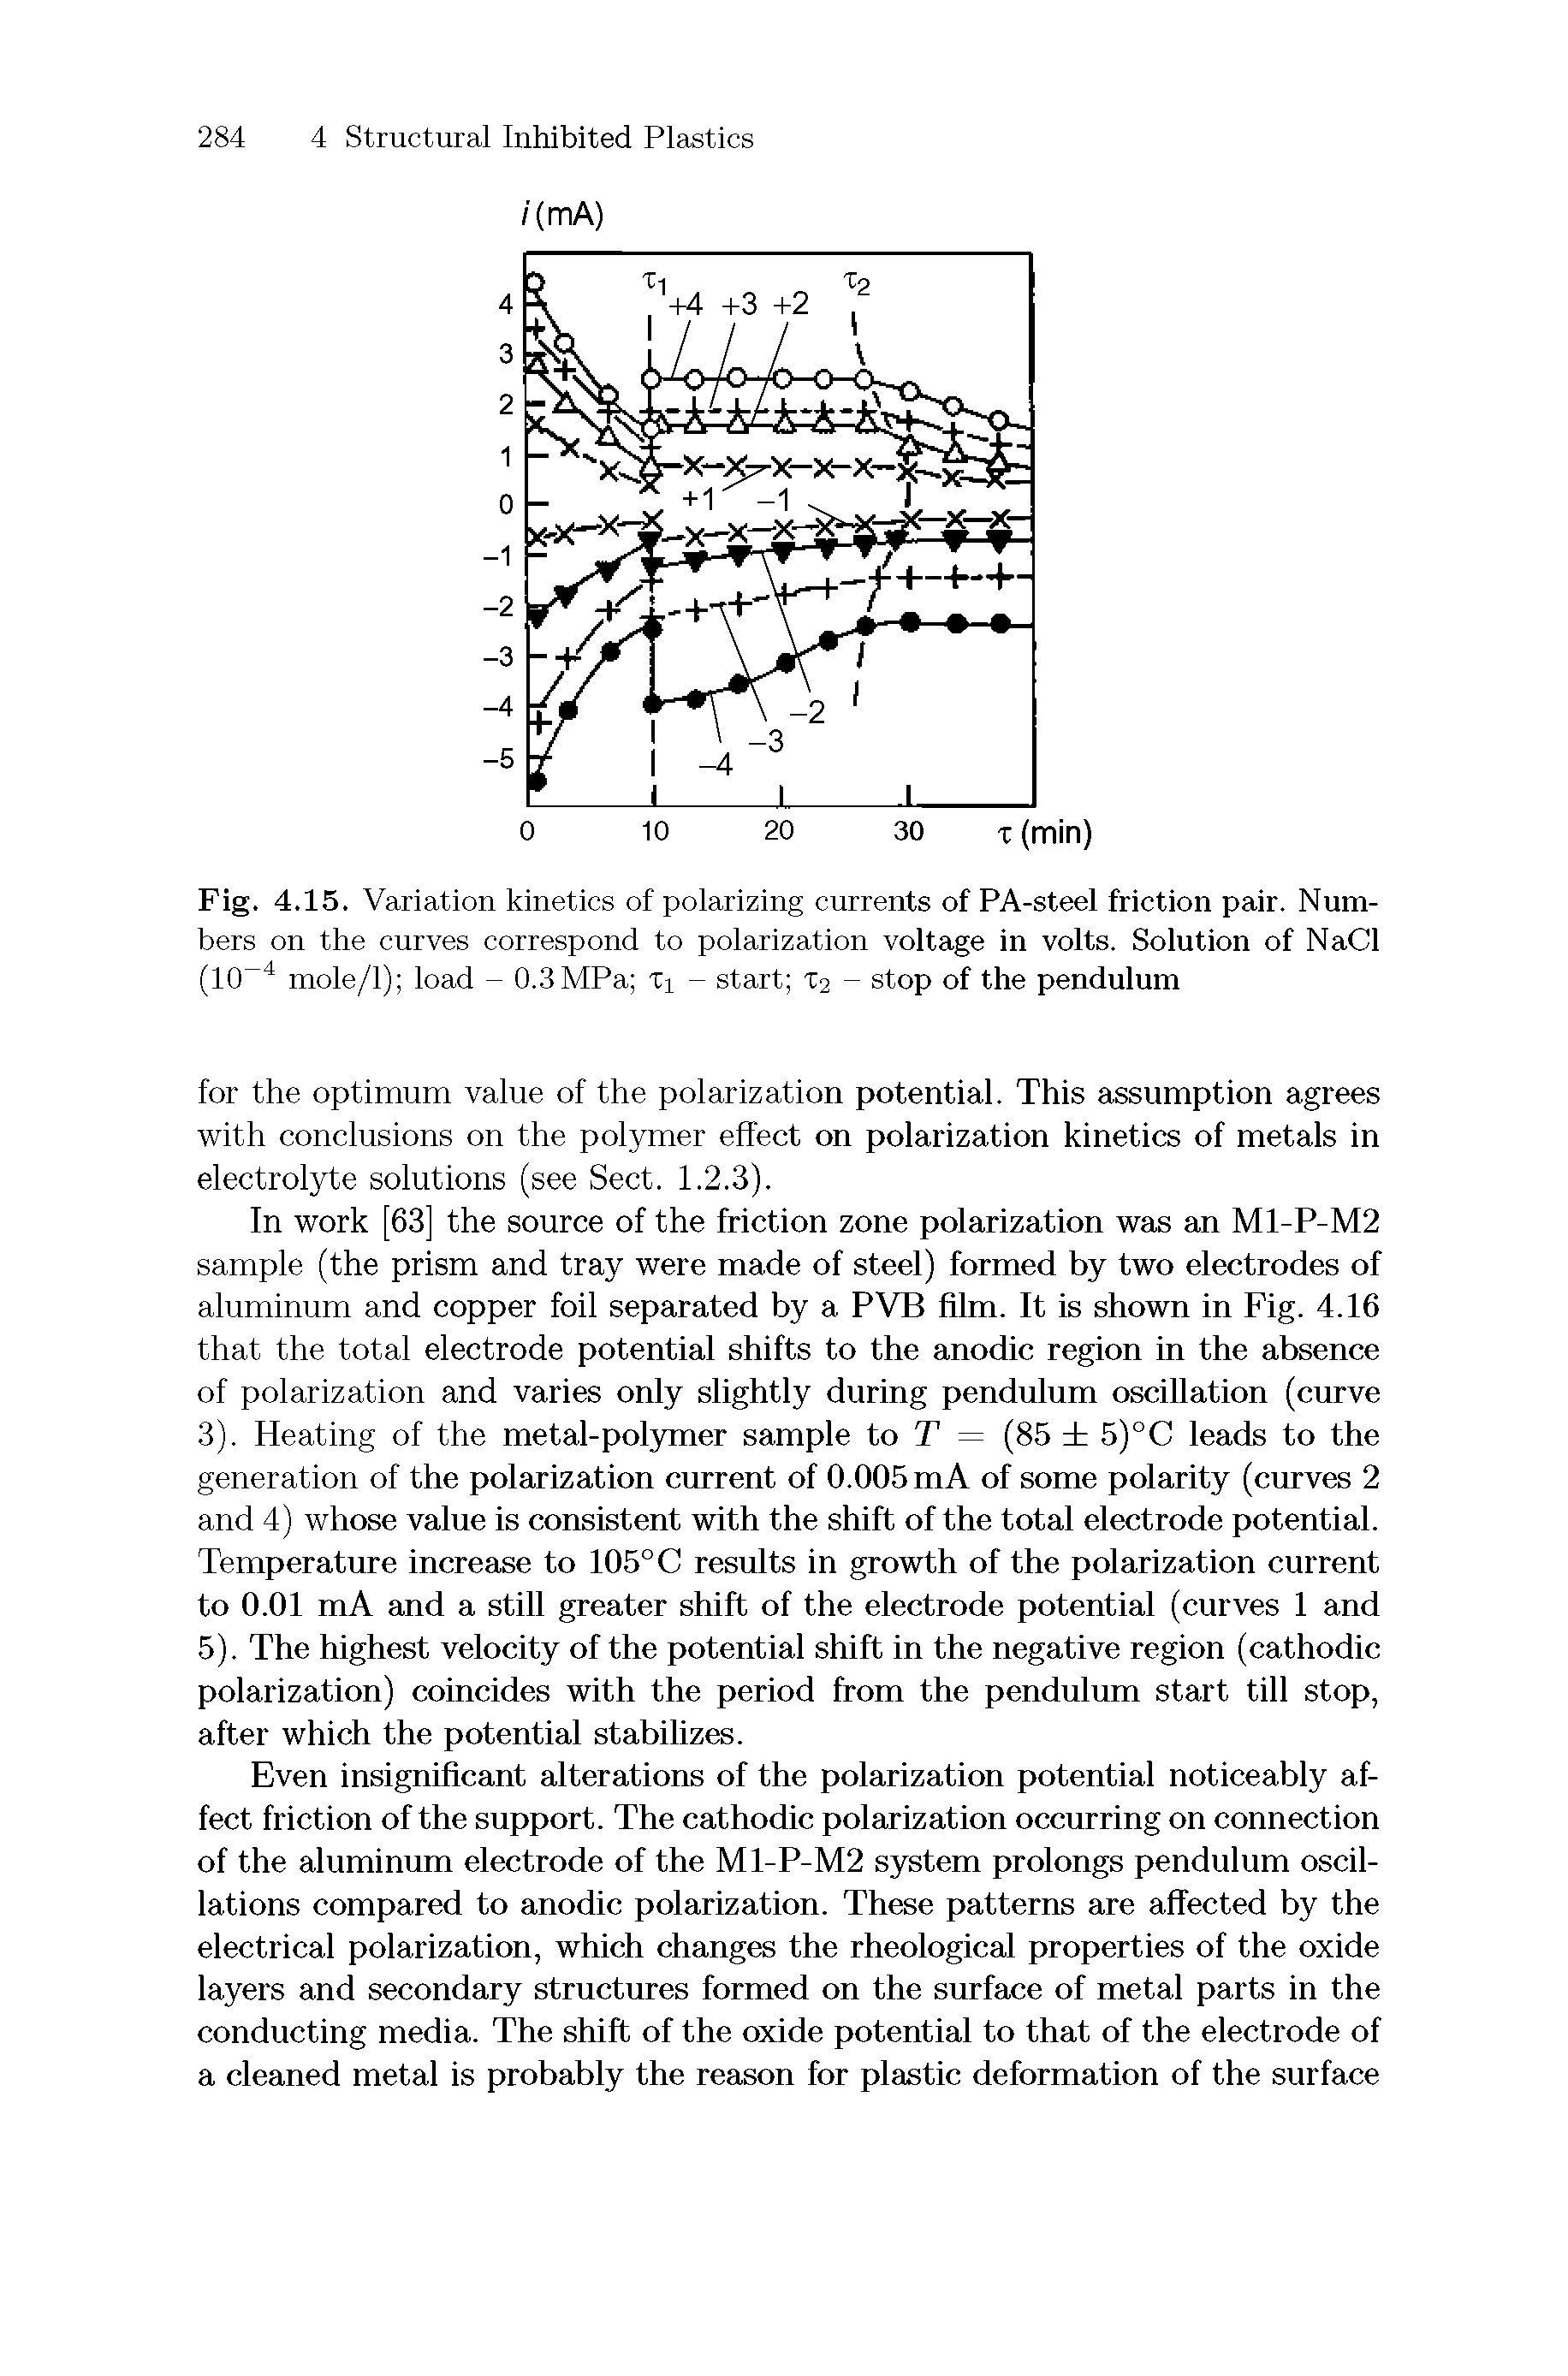 Fig. 4.15. Variation kinetics of polarizing currents of PA-steel friction pair. Numbers on the curves correspond to polarization voltage in volts. Solution of NaCl (10 mole/1) load - 0.3MPa Xi - start %2 - stop of the pendulum...